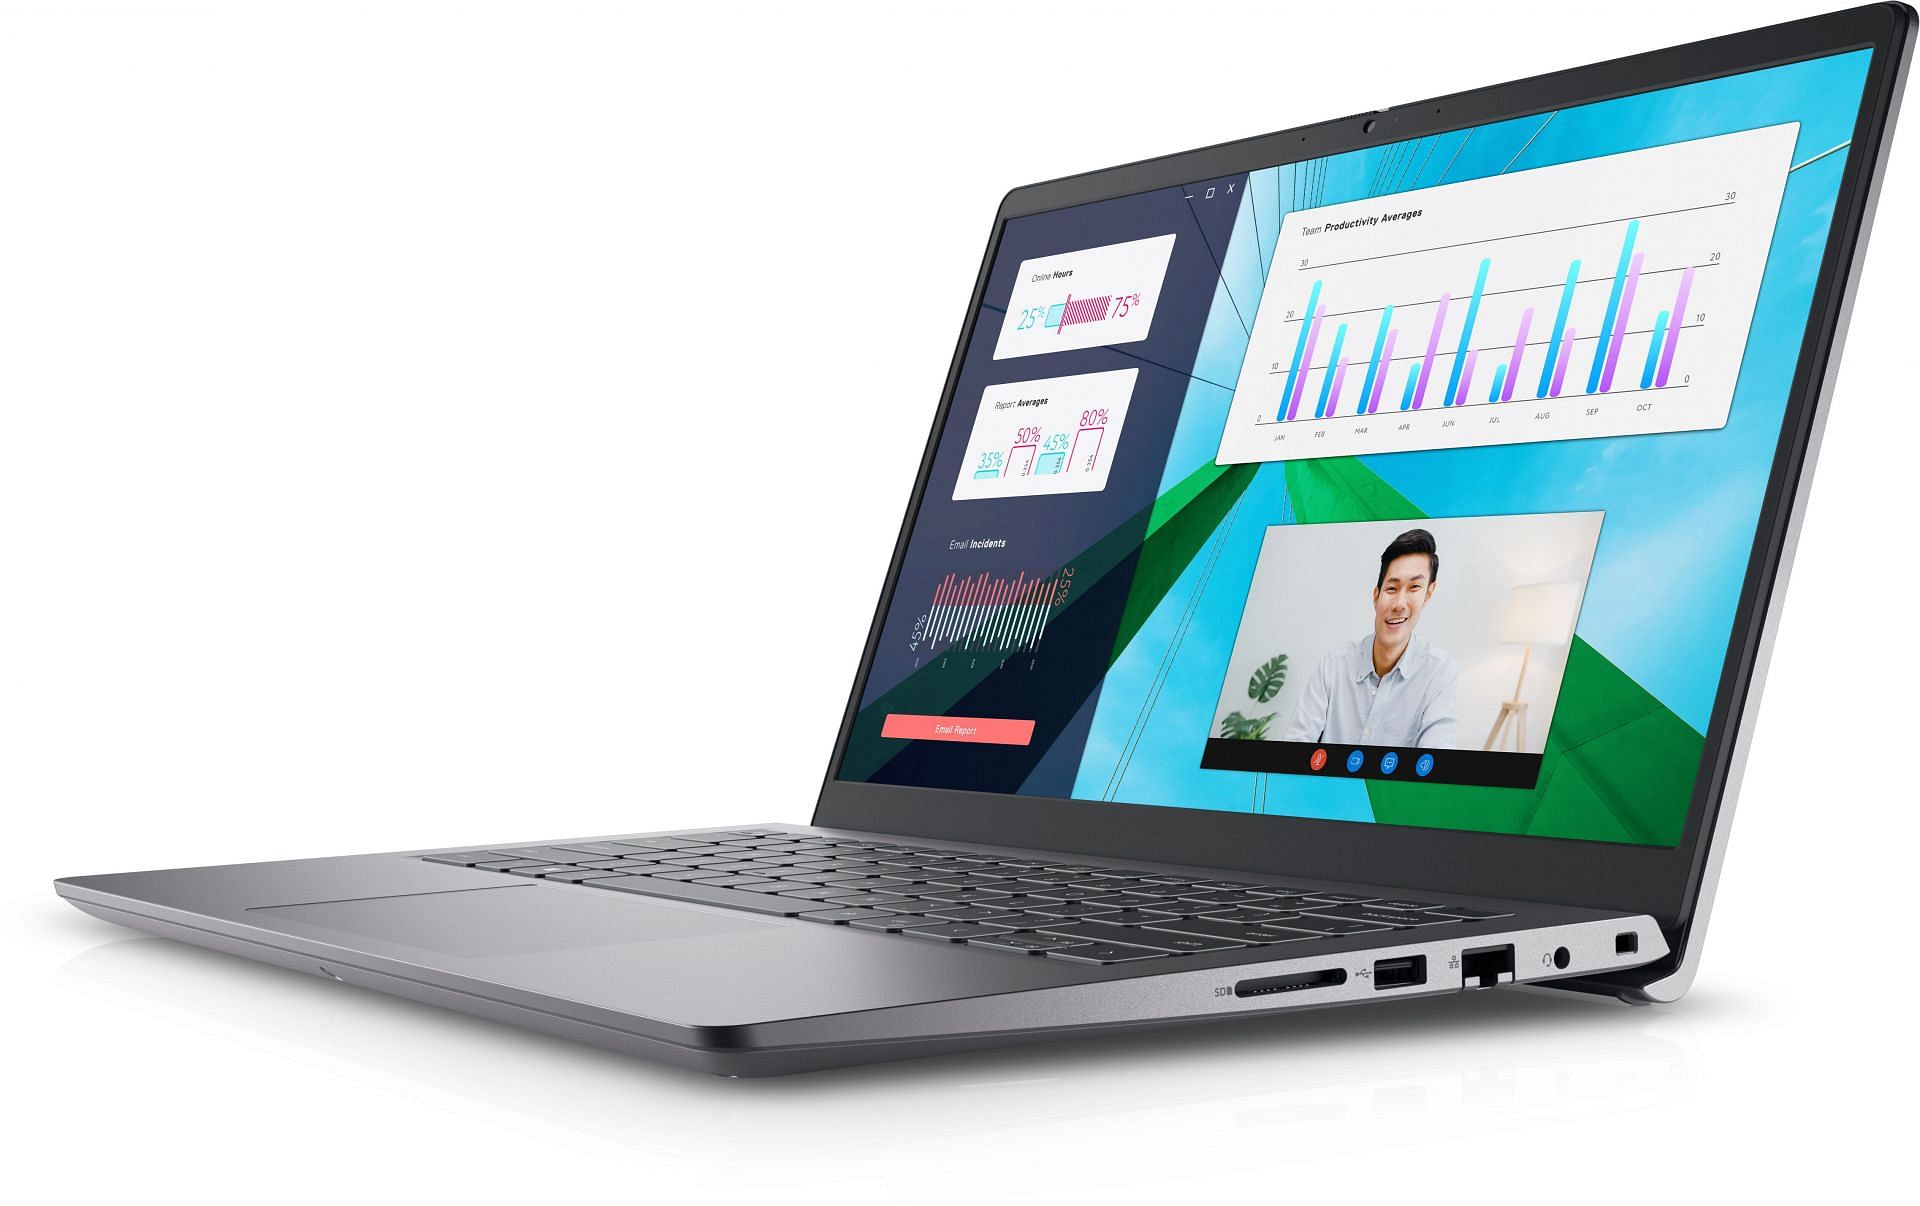 The Dell Vostro 3430 is available at the Amazon Great Indian Festival (Image via Dell)